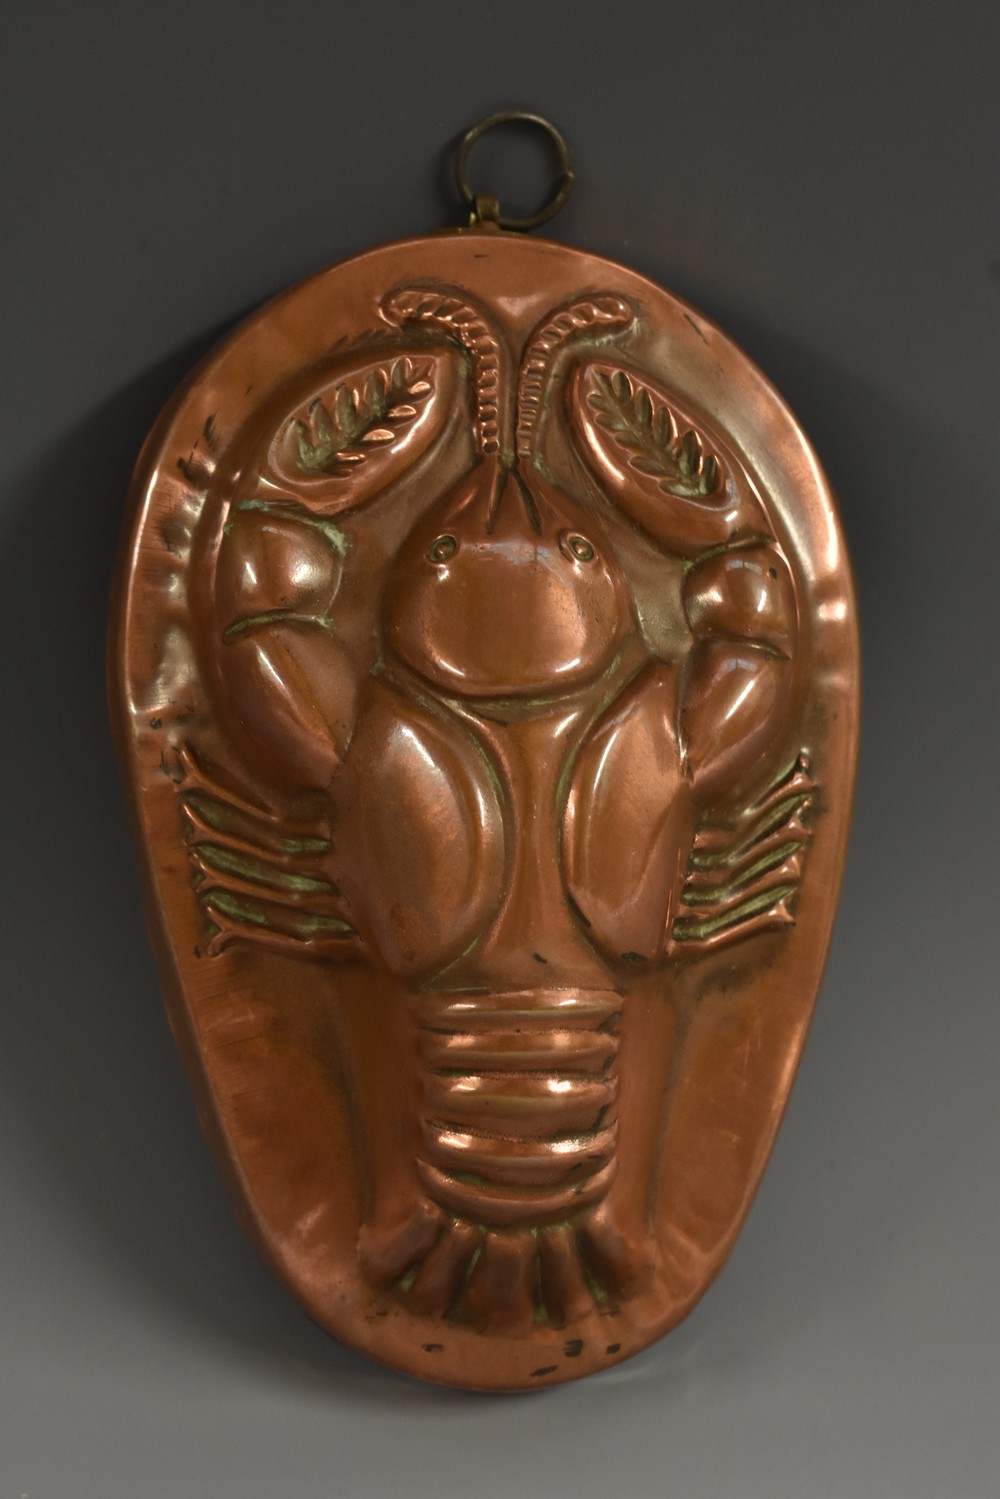 A 19th century novelty copper jelly mould, embossed as a crayfish,